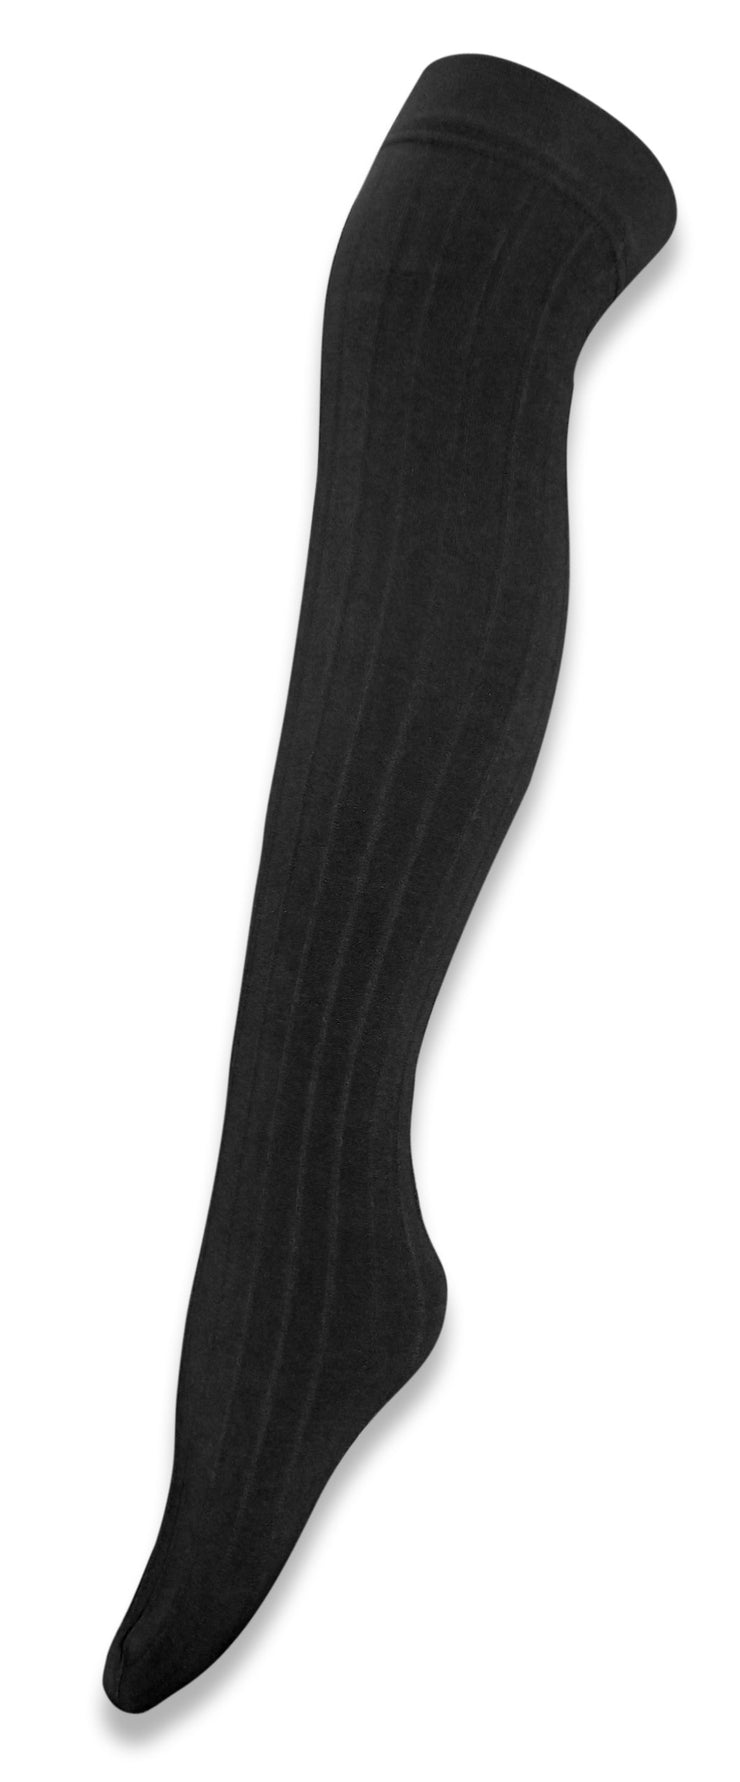 Cozy Warm Stretchy Over the Knee 2 Pair Pack Boot Socks (Black,black)